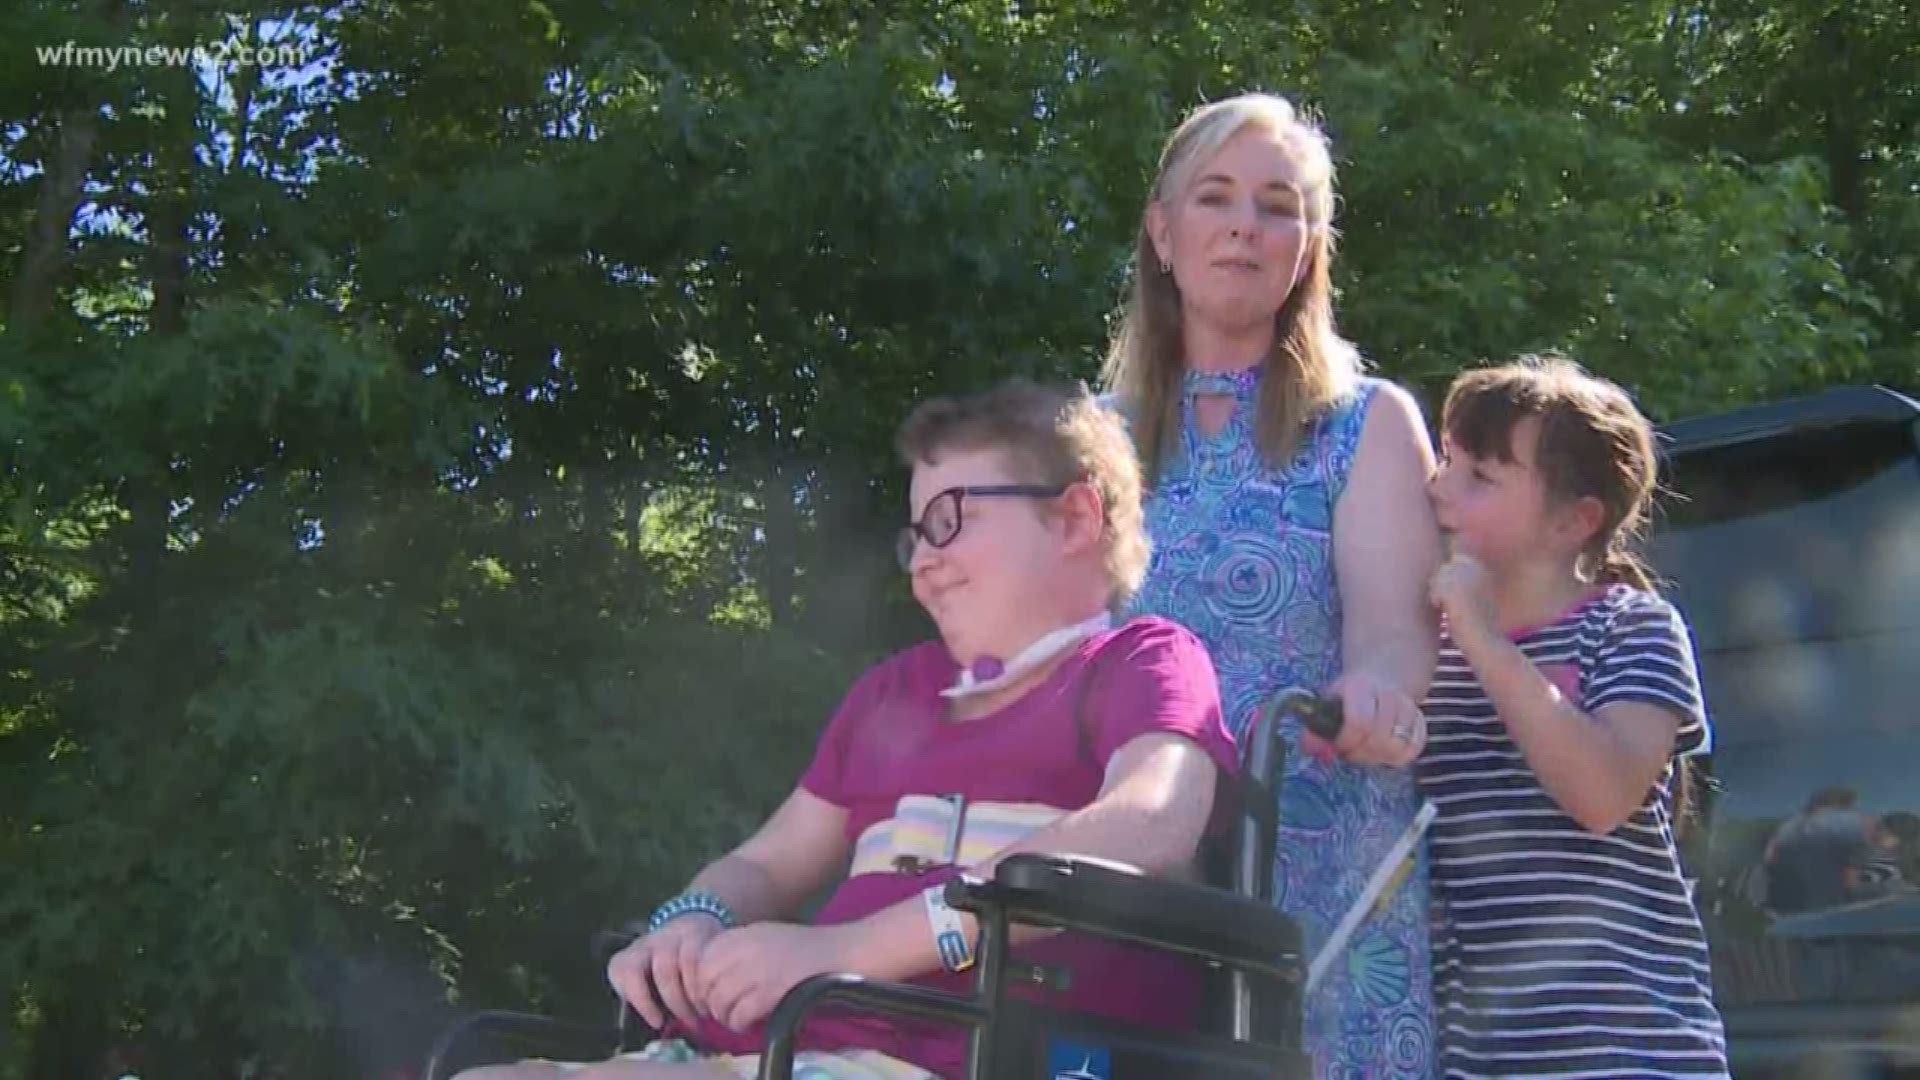 She's been away from her Summerfield home for 7 months, undergoing treatments. But on Tuesday, she finally returned home where she was surprised by family and friends.